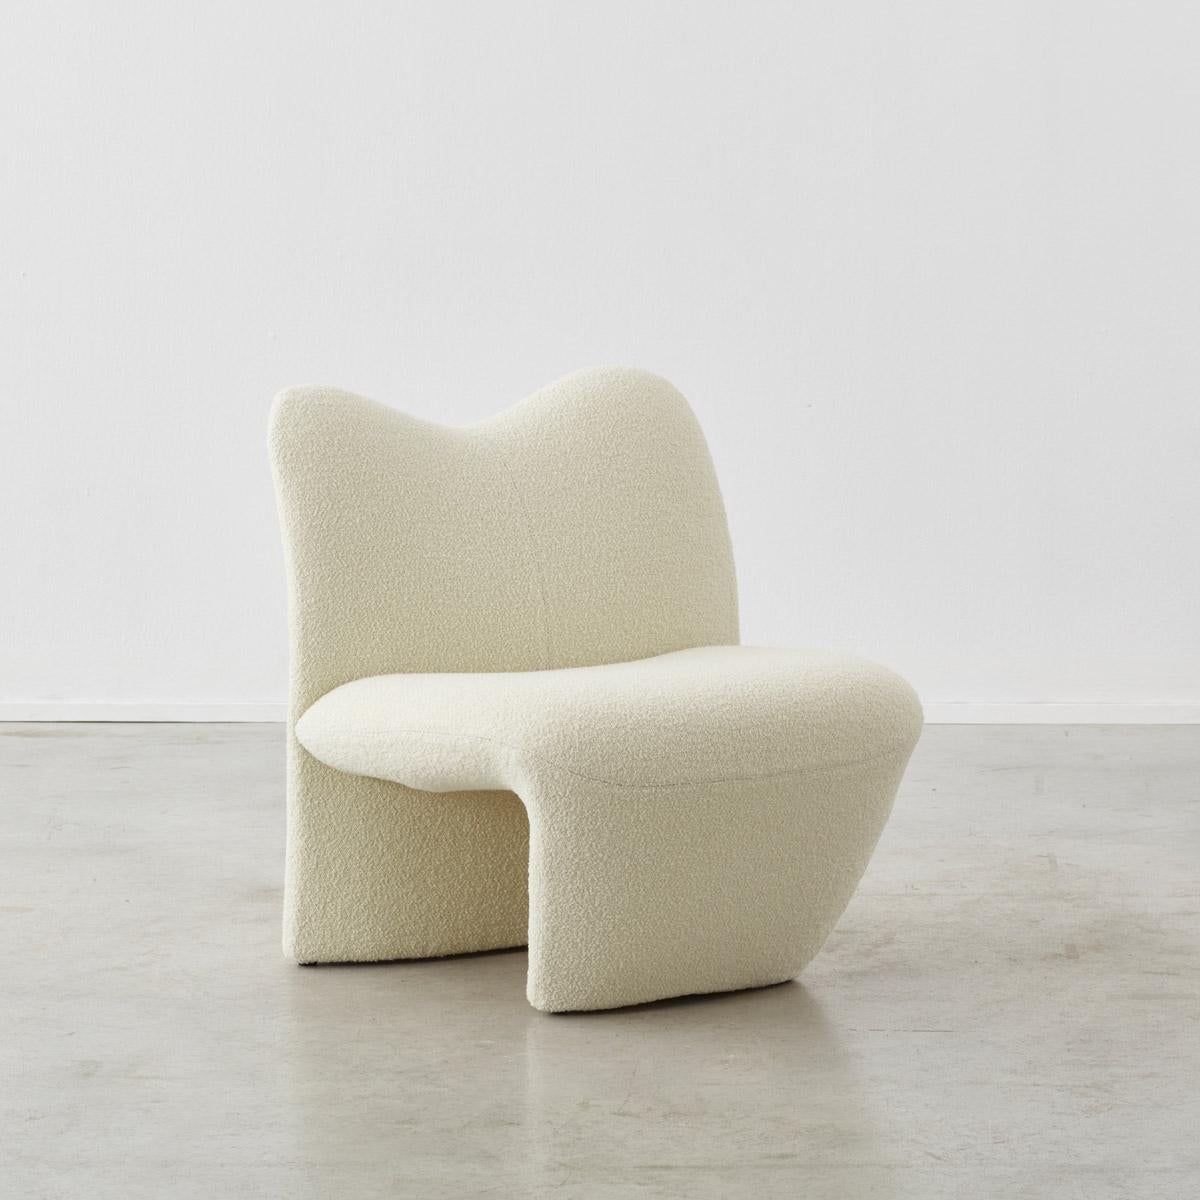 This chair is newly upholstered to enhance its anthropomorphic character. Jane Dillon (1943-present) studied under Ettore Sottsass in the late 1960s and went on to make designs for Habitat and Conran Associates. This chair, a collaboration with